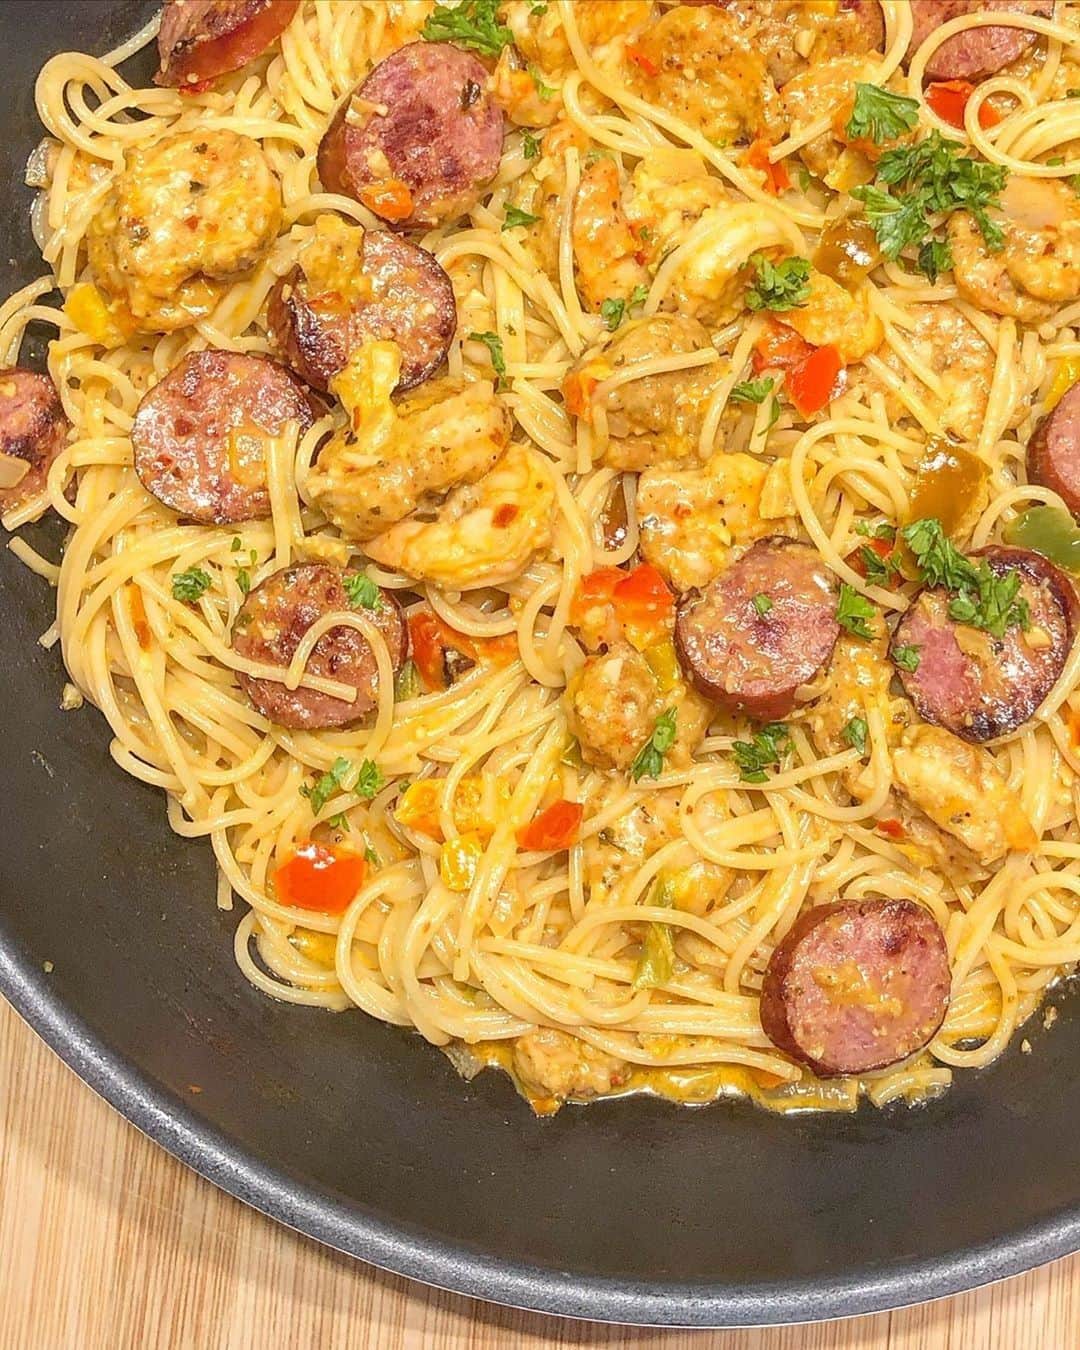 Flavorgod Seasoningsさんのインスタグラム写真 - (Flavorgod SeasoningsInstagram)「Flavor God Seasoned Cajun Shrimp "Pasta" {keto friendly} ⁠ -⁠ Customer:👉 @_dashofhappiness_⁠ Seasoned with:👉 #Flavorgod Cajun Lovers Seasoning⁠ -⁠ Add delicious flavors to any meal!⬇⁠ Click the link in my bio @flavorgod⁠ ✅www.flavorgod.com⁠ -⁠ 🍤 this was one delicious dinner! Guilt free, no bloat, and all the flavors.⁠ ⁠ I used Palmini spaghetti - which i like MUCH better than miracle noodles or Shirataki/Pasta zero - they have no smell and really feel like pasta! They’re around 4g net carbs per serving and about 30 calories!⁠ ⁠ If you want it spicier, add in more cayenne and pepper flakes! Taste the sauce as you go and adjust to your spicy-level 🌶⁠ .⁠ .⁠ .⁠ INGREDIENTS (~4 servings)⁠ * Pound of shrimp⁠ * about 6oz chicken sausage or Kielbasa⁠ * 1 red bell & orange bell pepper, diced⁠ * 1 small onion, diced⁠ * 2 garlic cloves, minced⁠ * 2 tbs cajun seasoning; i used @flavorgod⁠ * 1/2 tsp cayenne and paprika⁠ * 1/2 tsp red pepper flakes⁠ * 1/4 tsp salt and pepper⁠ *1 cup heavy cream⁠ * 1/4 cup chicken stock⁠ * 1 cup shredded Parmesan⁠ * 2 packages Palmini spaghetti (or other pasta alternative)⁠ * 1 tbs butter⁠ * 1 tbs avocado or olive oil⁠ 🍤⁠ METHOD⁠ * Prep noodles according to package and set aside⁠ * Heat skillet with oil. Pan sear the kielbasa till browned.⁠ * Add in onions and stir around for 2mins. Add in garlic until fragrant - do not burn.⁠ *Add in the seasonings and spices - stir to release flavor.⁠ * Add in peppers and mix around a bit but don’t overcook⁠ * Melt in butter and add in shrimp. Toss to cover shrimp with all other ingredients. Cook about 2mins. Don’t overcook your shrimp - it will cook in the process and you don’t want a tough shrimp.⁠ *Turn stove to medium high; add in chicken stock, then cream. Stir around and let it simmer about 2-3 minutes.⁠ *Add in cheese. Throw in “pasta”. Mix well!⁠ *Top with parsley, some red pepper flakes & serve!⁠ -⁠ Flavor God Seasonings are:⁠ 💥ZERO CALORIES PER SERVING⁠ 🔥0 SUGAR PER SERVING ⁠ 💥GLUTEN FREE⁠ 🔥KETO FRIENDLY⁠ 💥PALEO FRIENDLY⁠ -⁠ #food #foodie #flavorgod #seasonings #glutenfree #mealprep #seasonings #breakfast #lunch #dinner #yummy #delicious #foodporn」7月13日 10時01分 - flavorgod